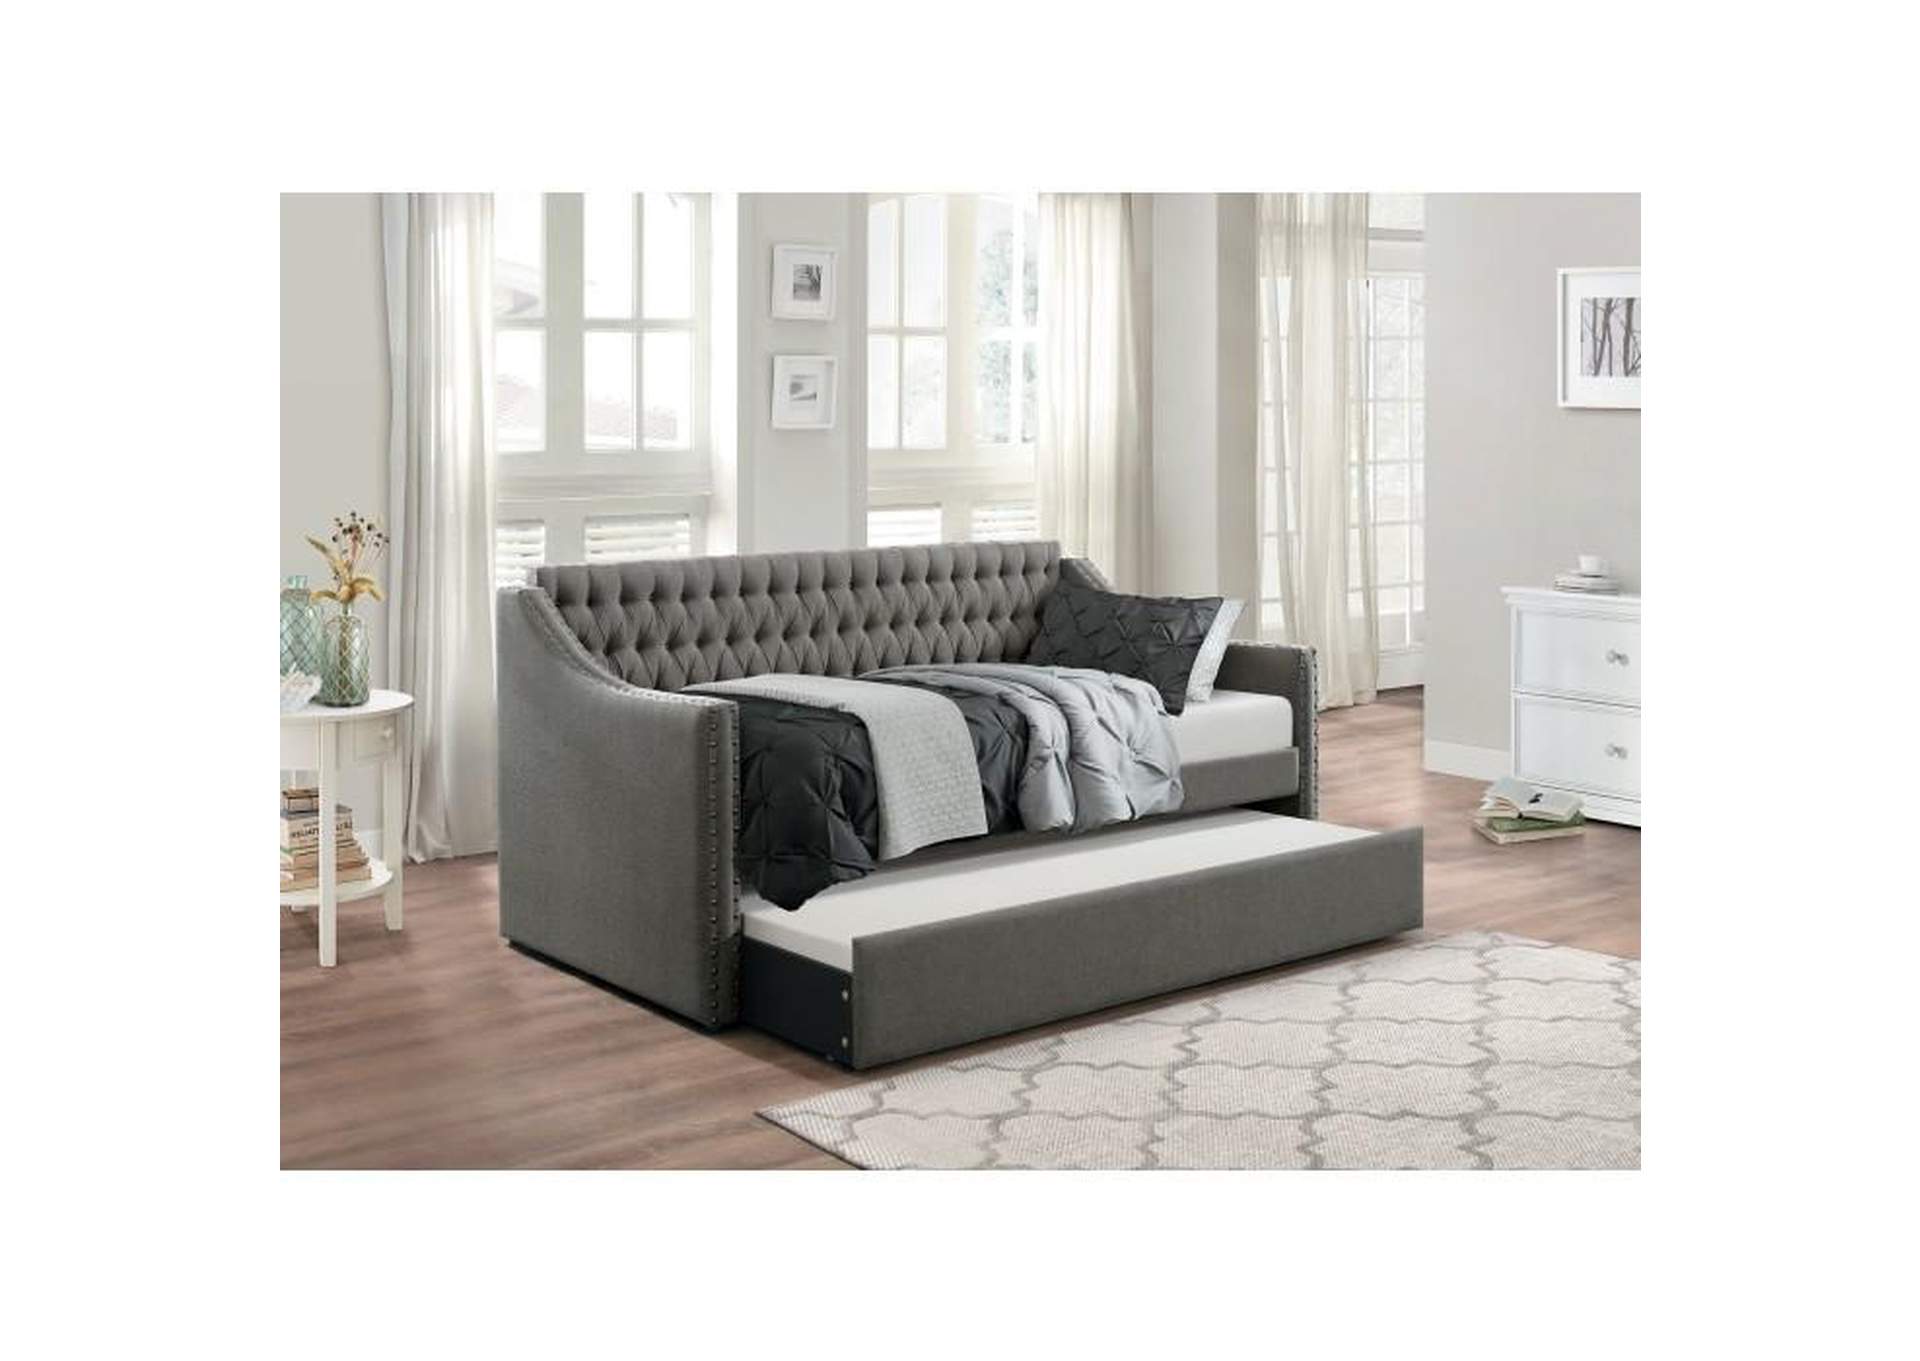 Tulney (2) Daybed with Trundle,Homelegance